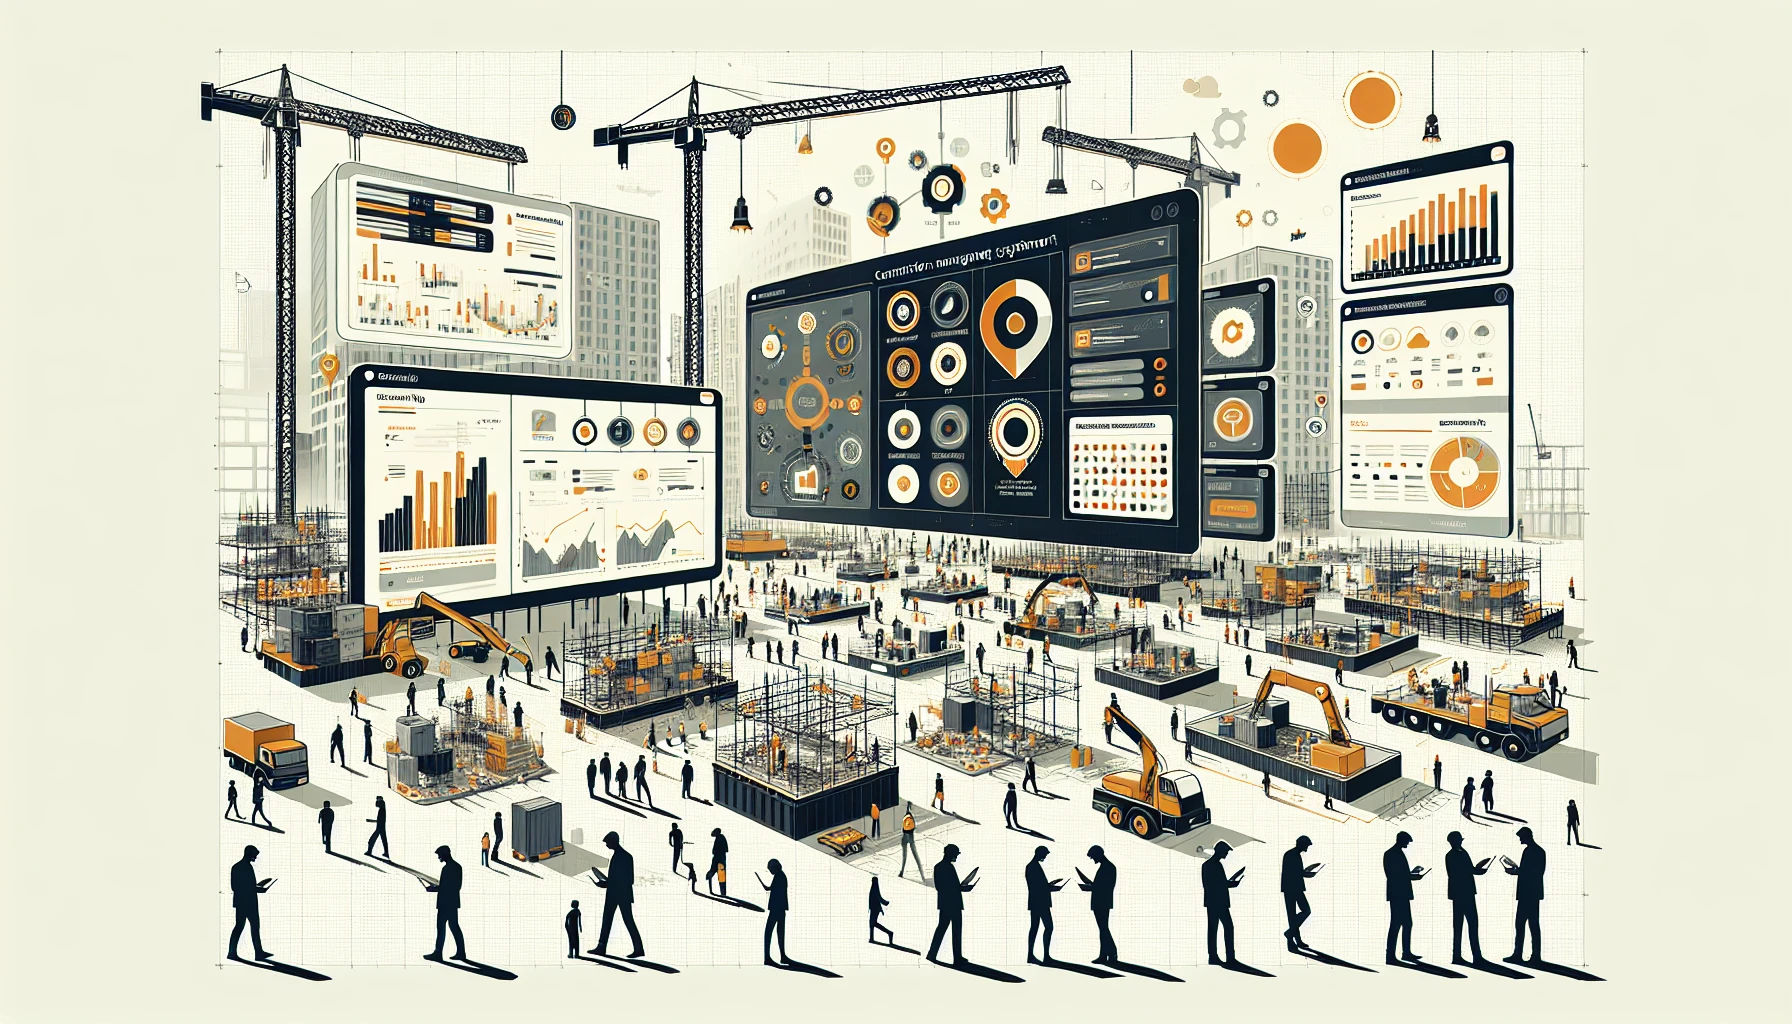 Construction site management system illustration with workers and dashboard